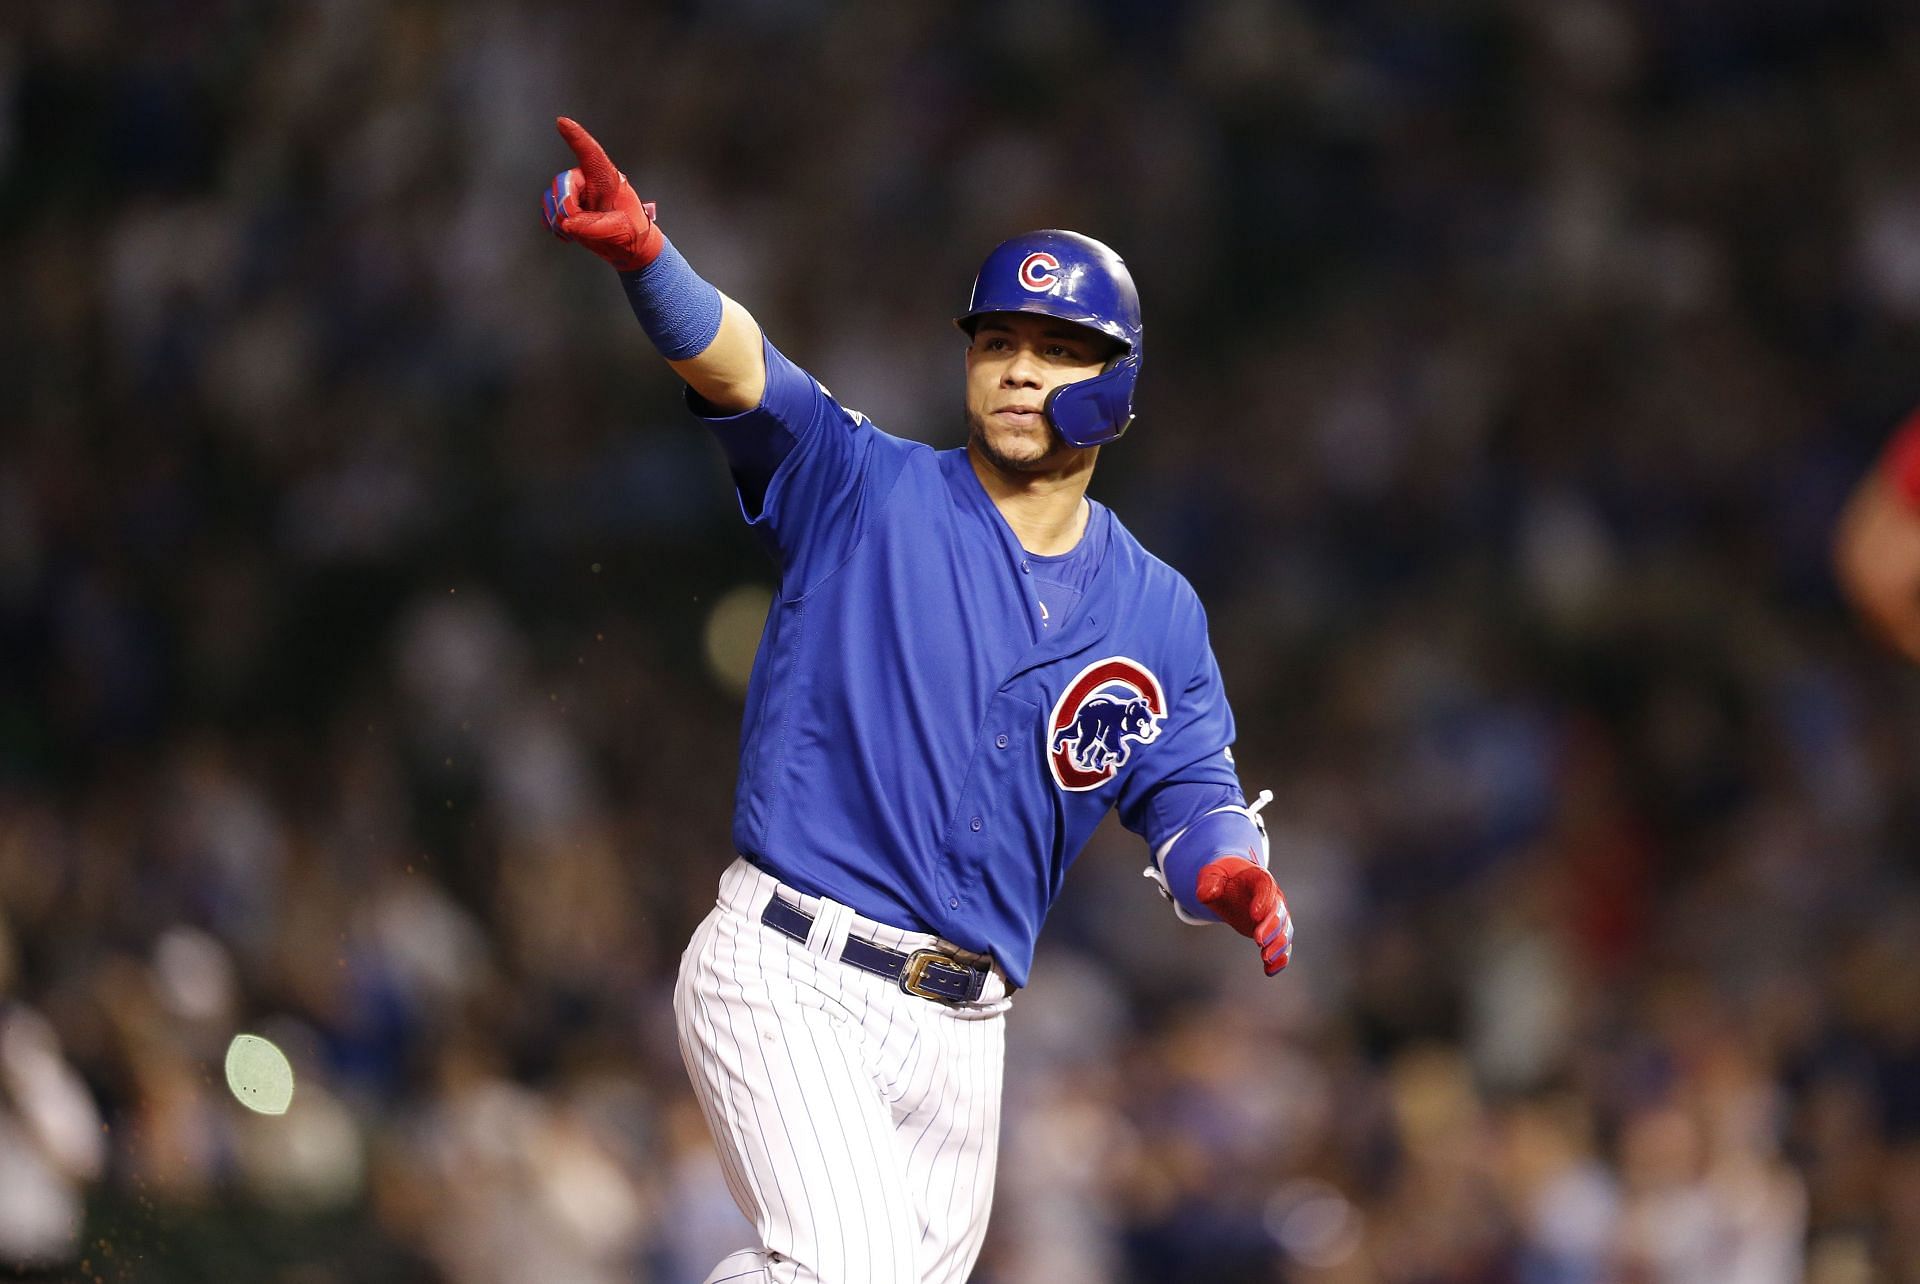 Cards sign All-Star catcher Contreras to 5-year deal